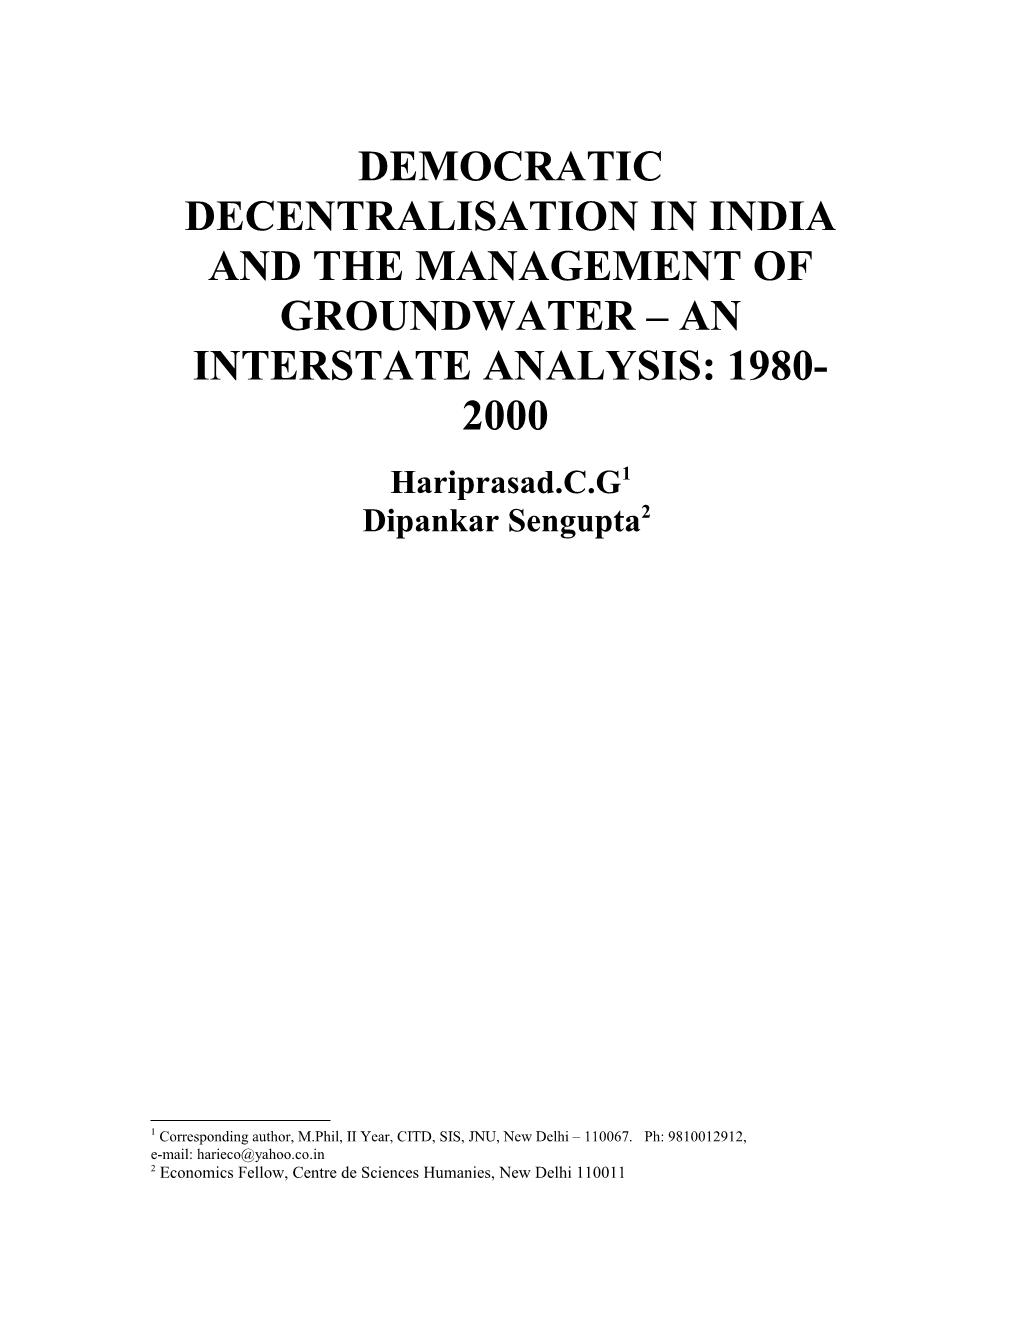 Democratic Decentralisation in India and the Management of Groundwater an Interstate Analysis